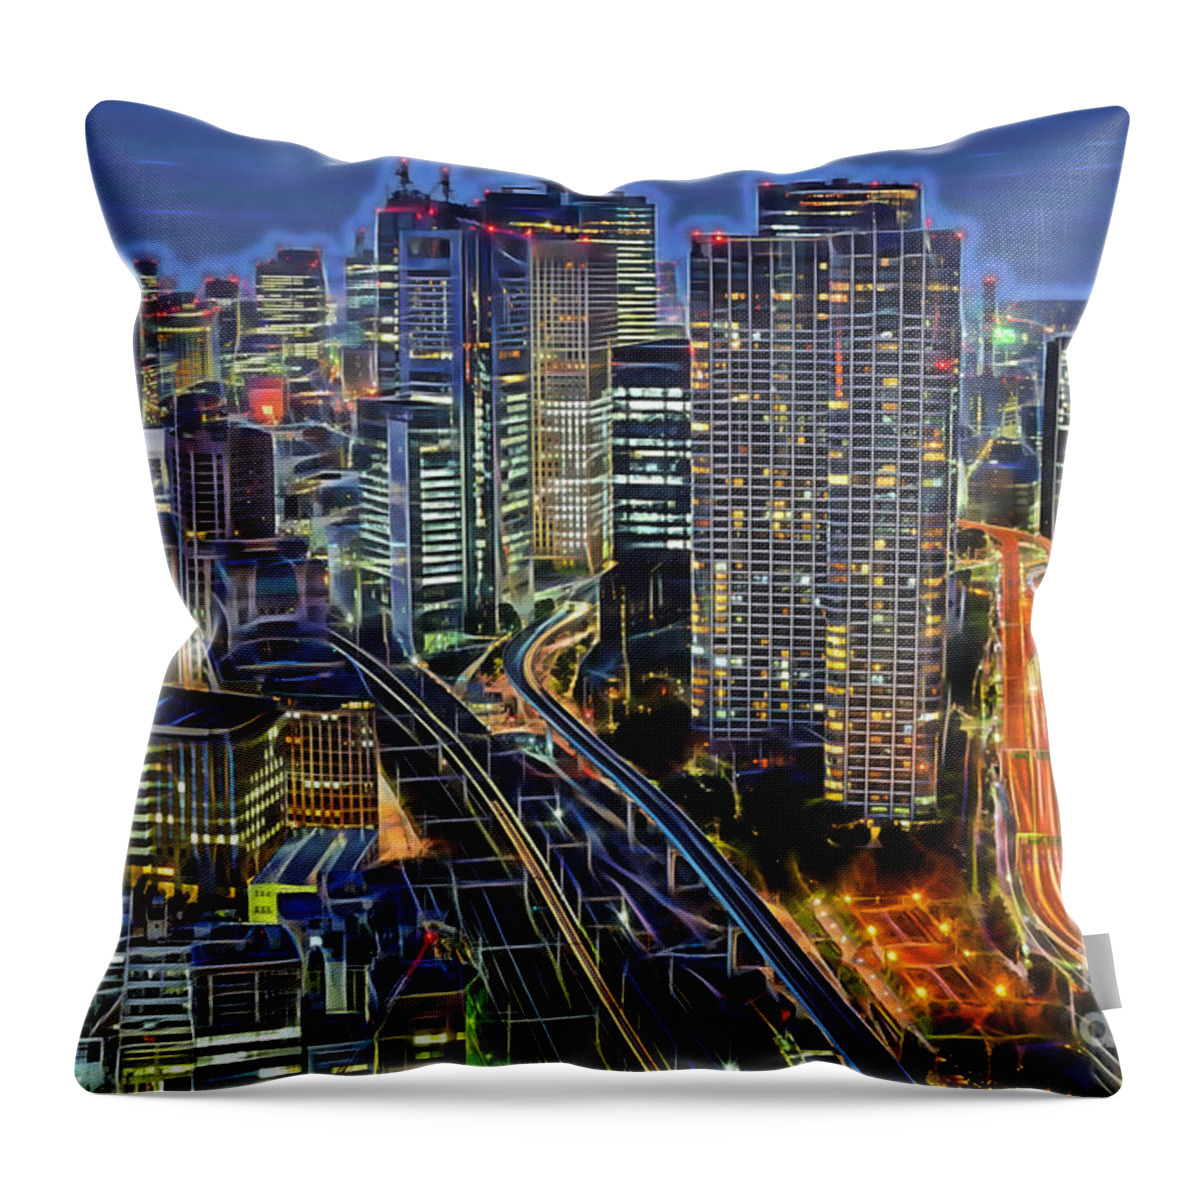 Tokyo Throw Pillow featuring the mixed media Tokyo Japan Skyline by Marvin Blaine